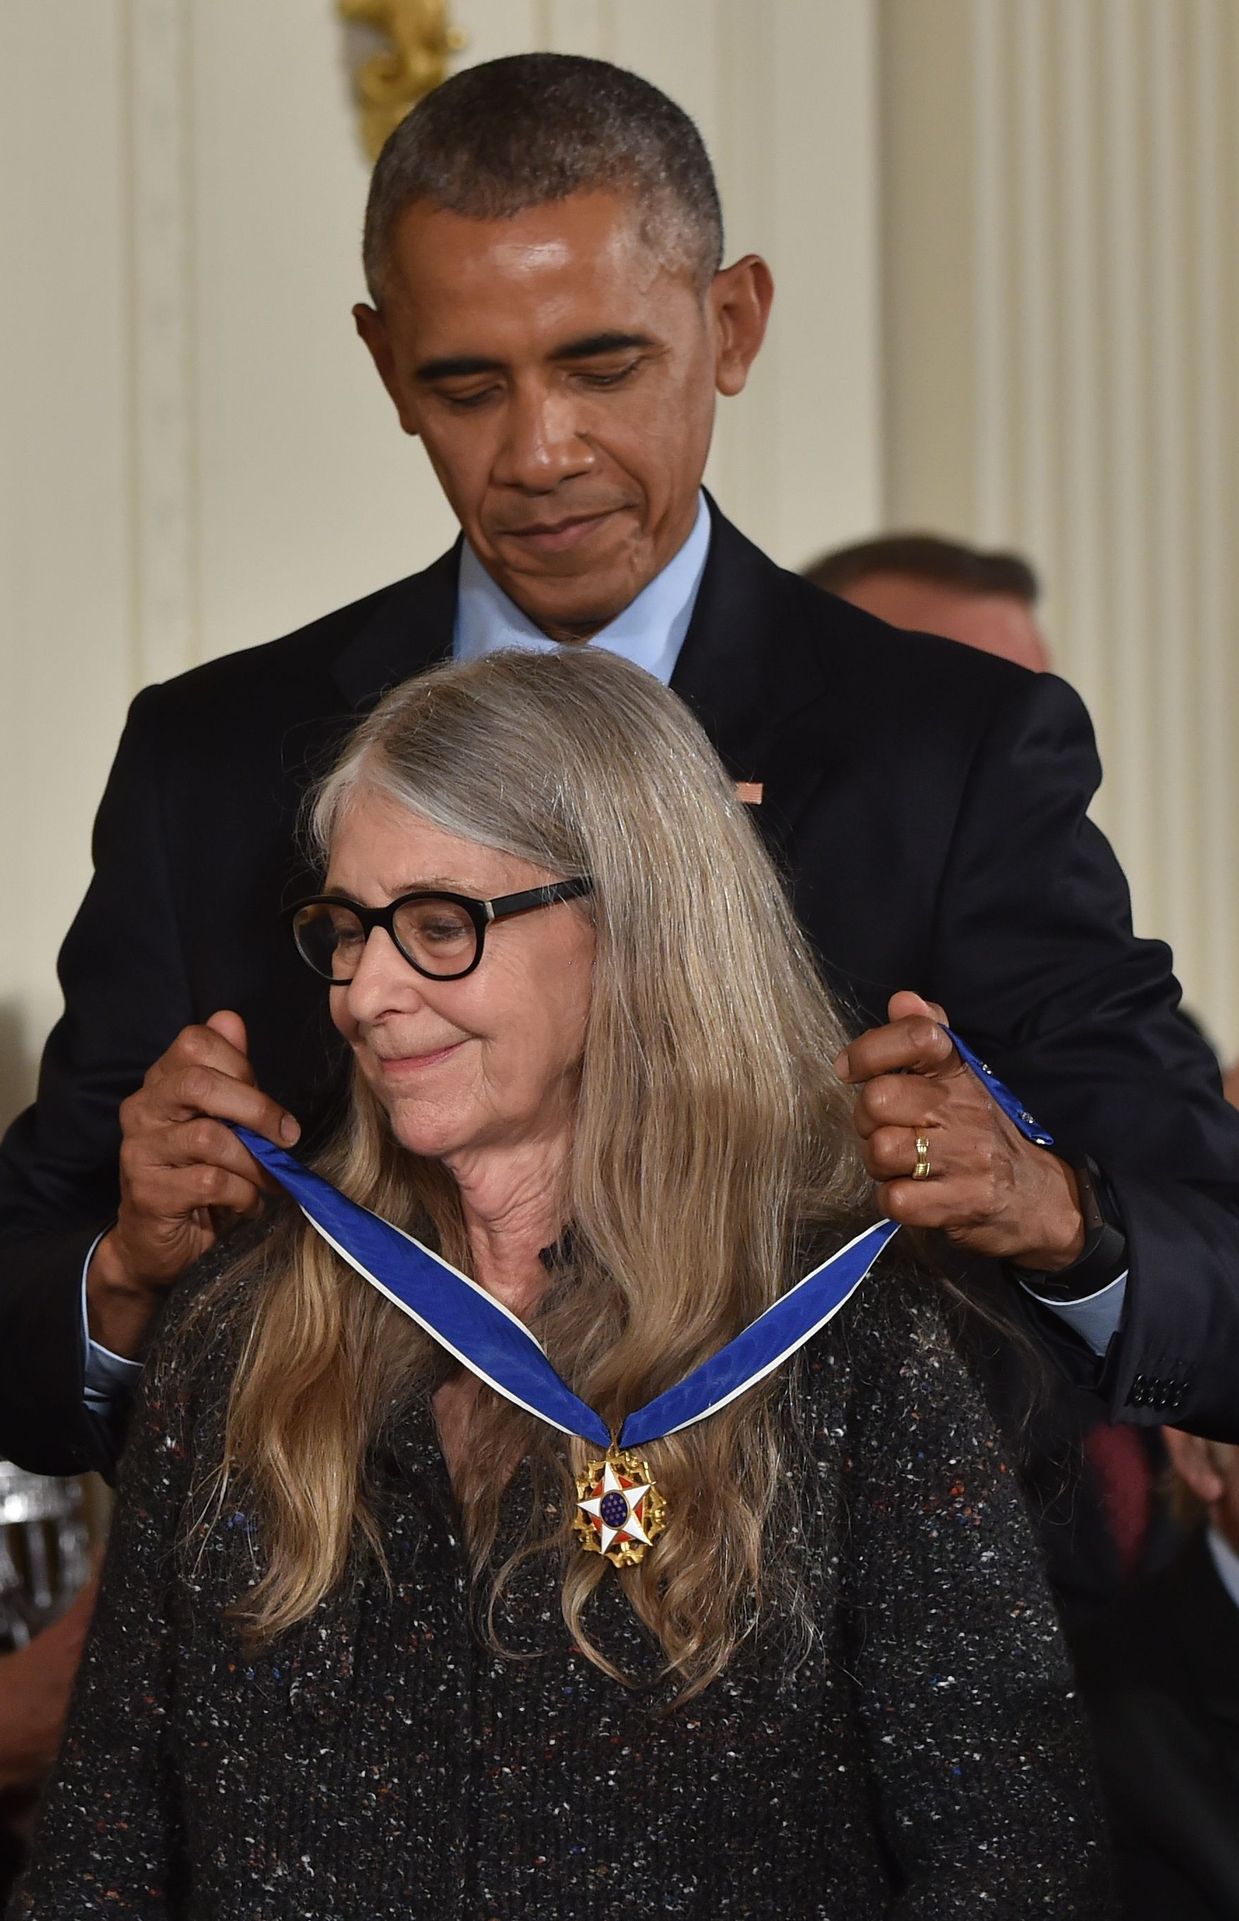 Obama Honors 21 Americans With Presidential Medal of Freedom